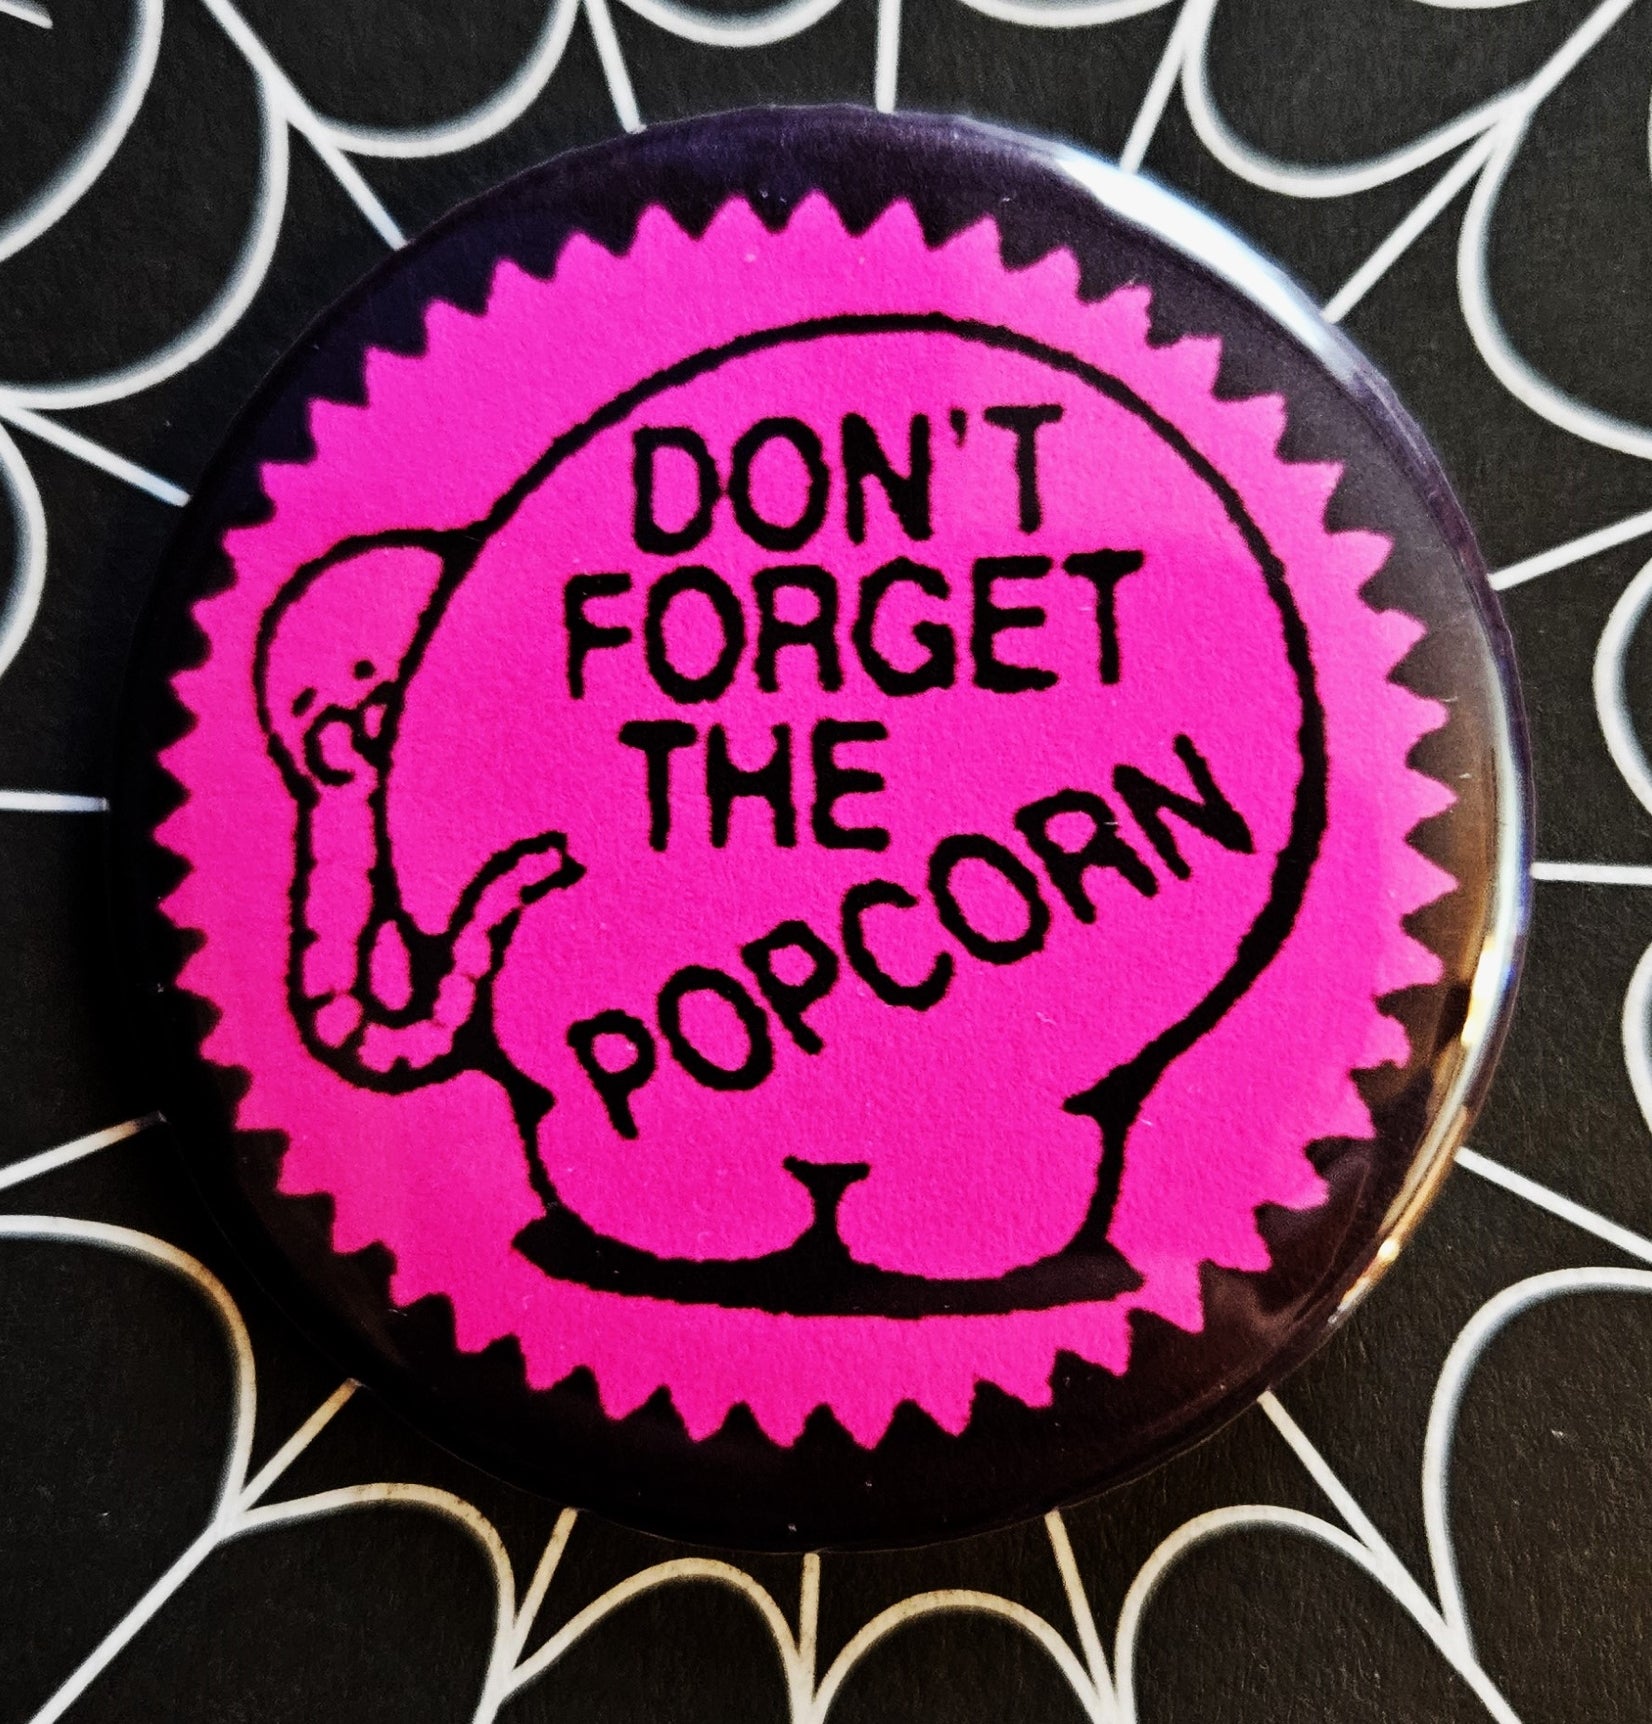 1.25” round button with image of pink zigzag border sticker with illustration of elephant with “Don’t forget the popcorn” message 